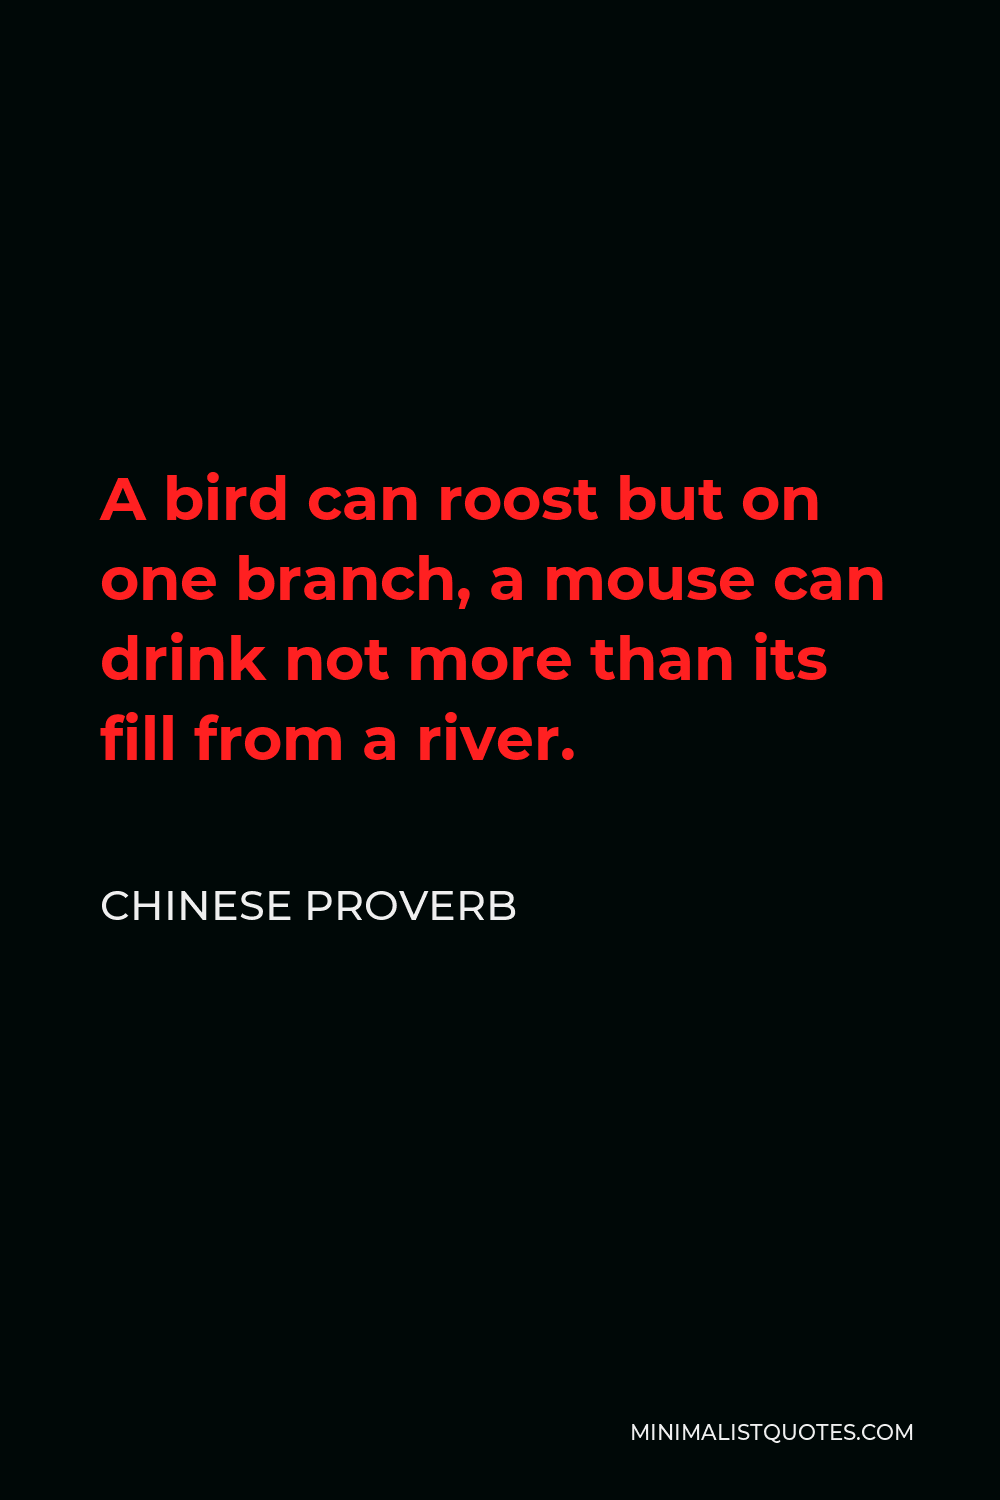 Chinese Proverb Quote - A bird can roost but on one branch, a mouse can drink not more than its fill from a river.